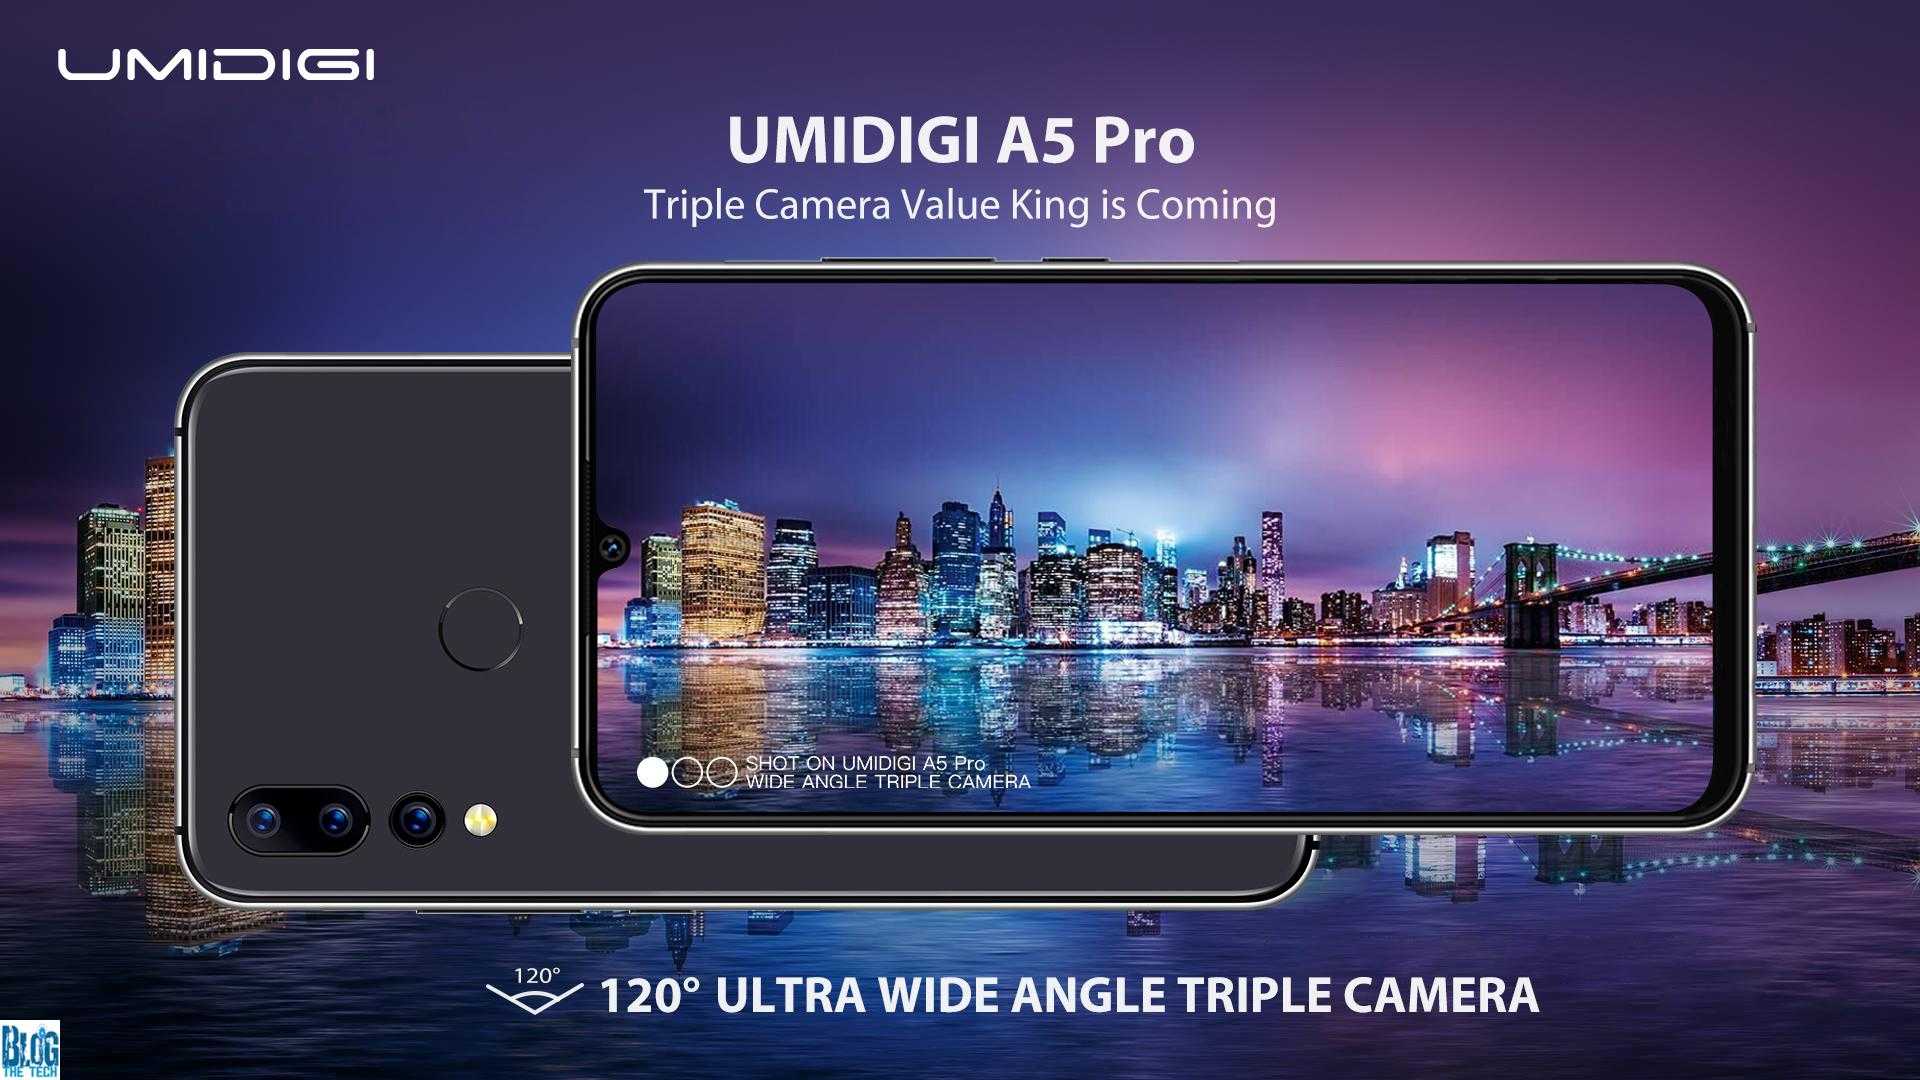 Stand a chance to Win the new Umidigi A5 Pro